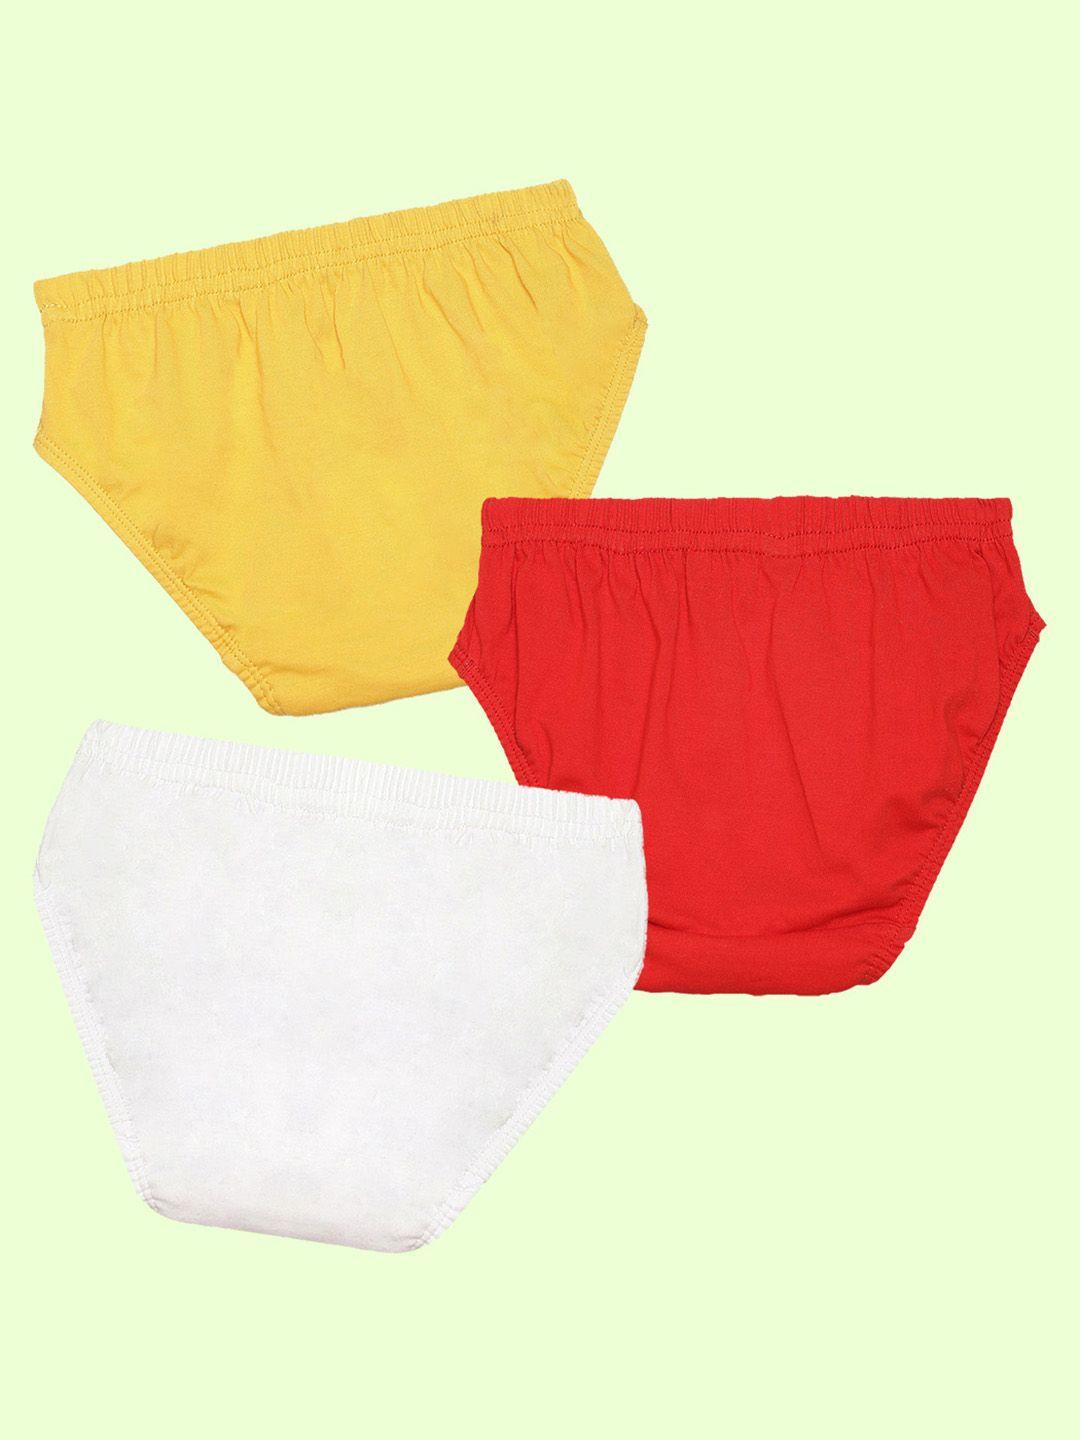 nusyl-boys-pack-of-3-pure-cotton-basic-briefs